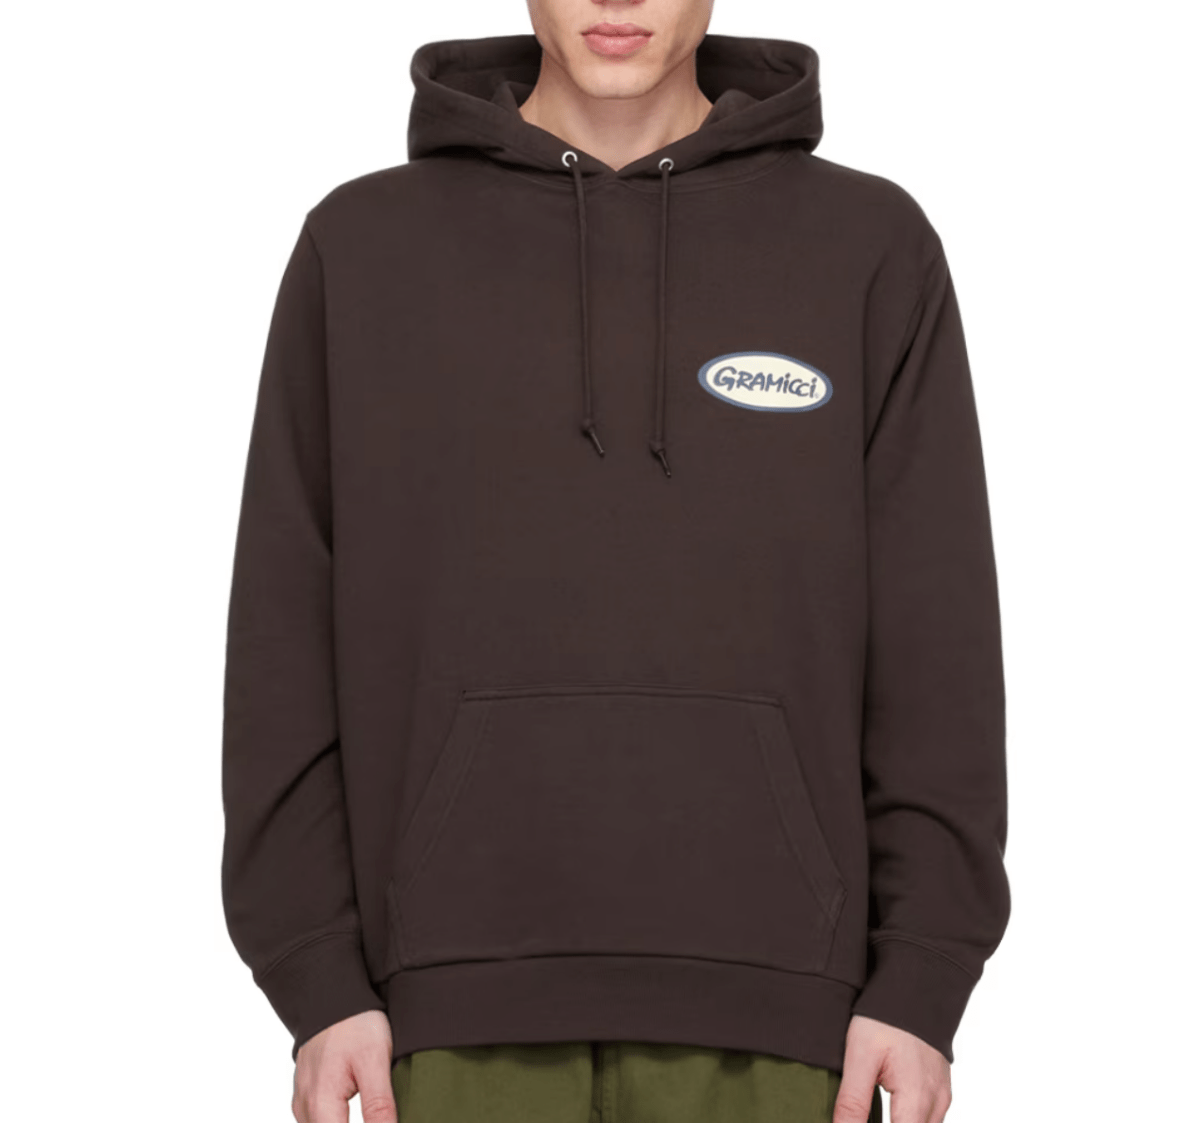 GRAMICCI OVAL HOODED SWEATSHIRT - Boutique Homies